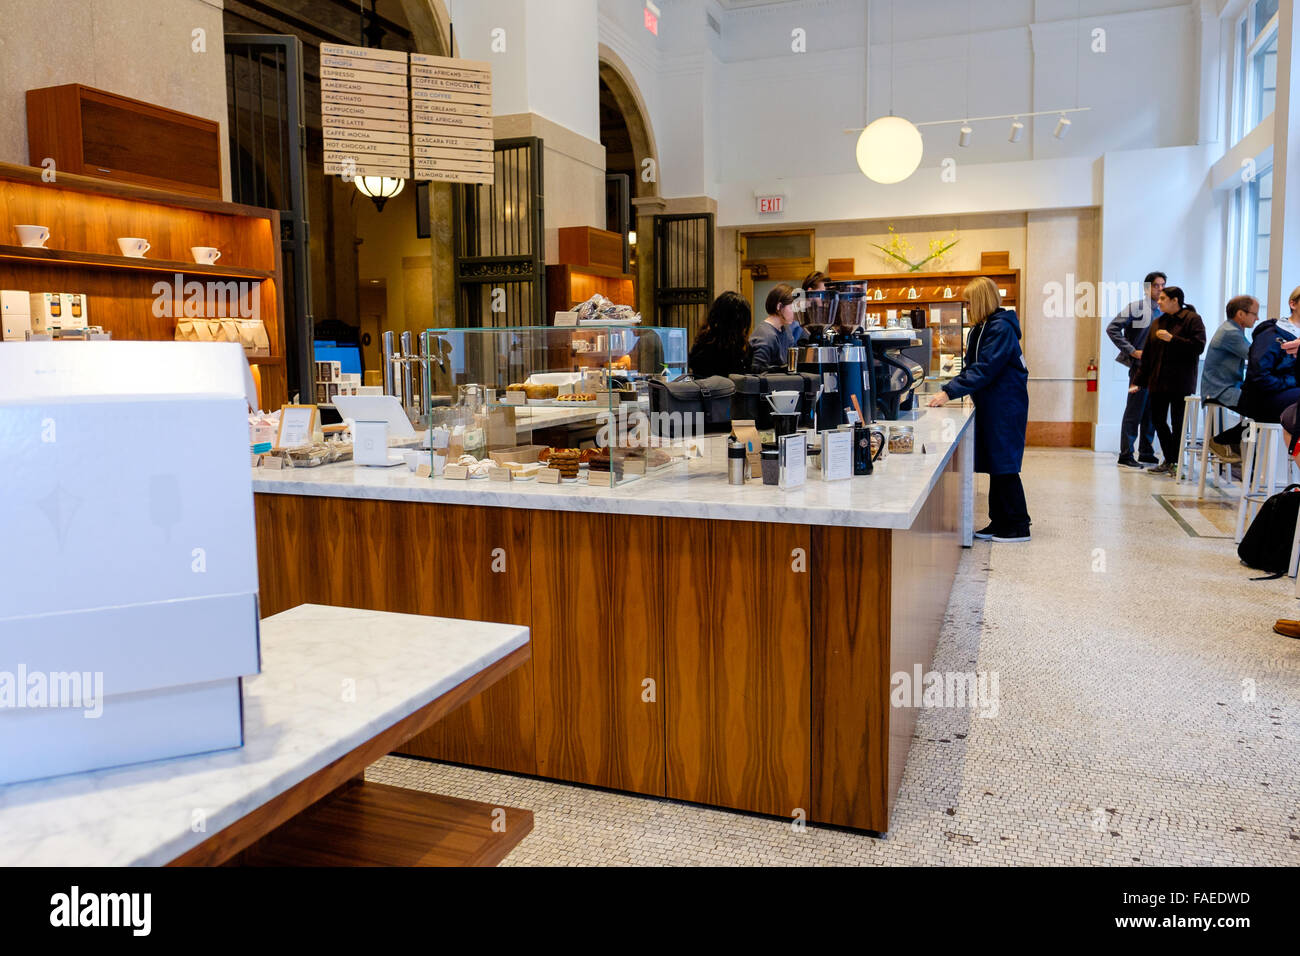 SAN FRANCISCO, CA - DECEMBER 13, 2015: Blue Bottle Coffee shop in the financial district of San Francisco. Stock Photo